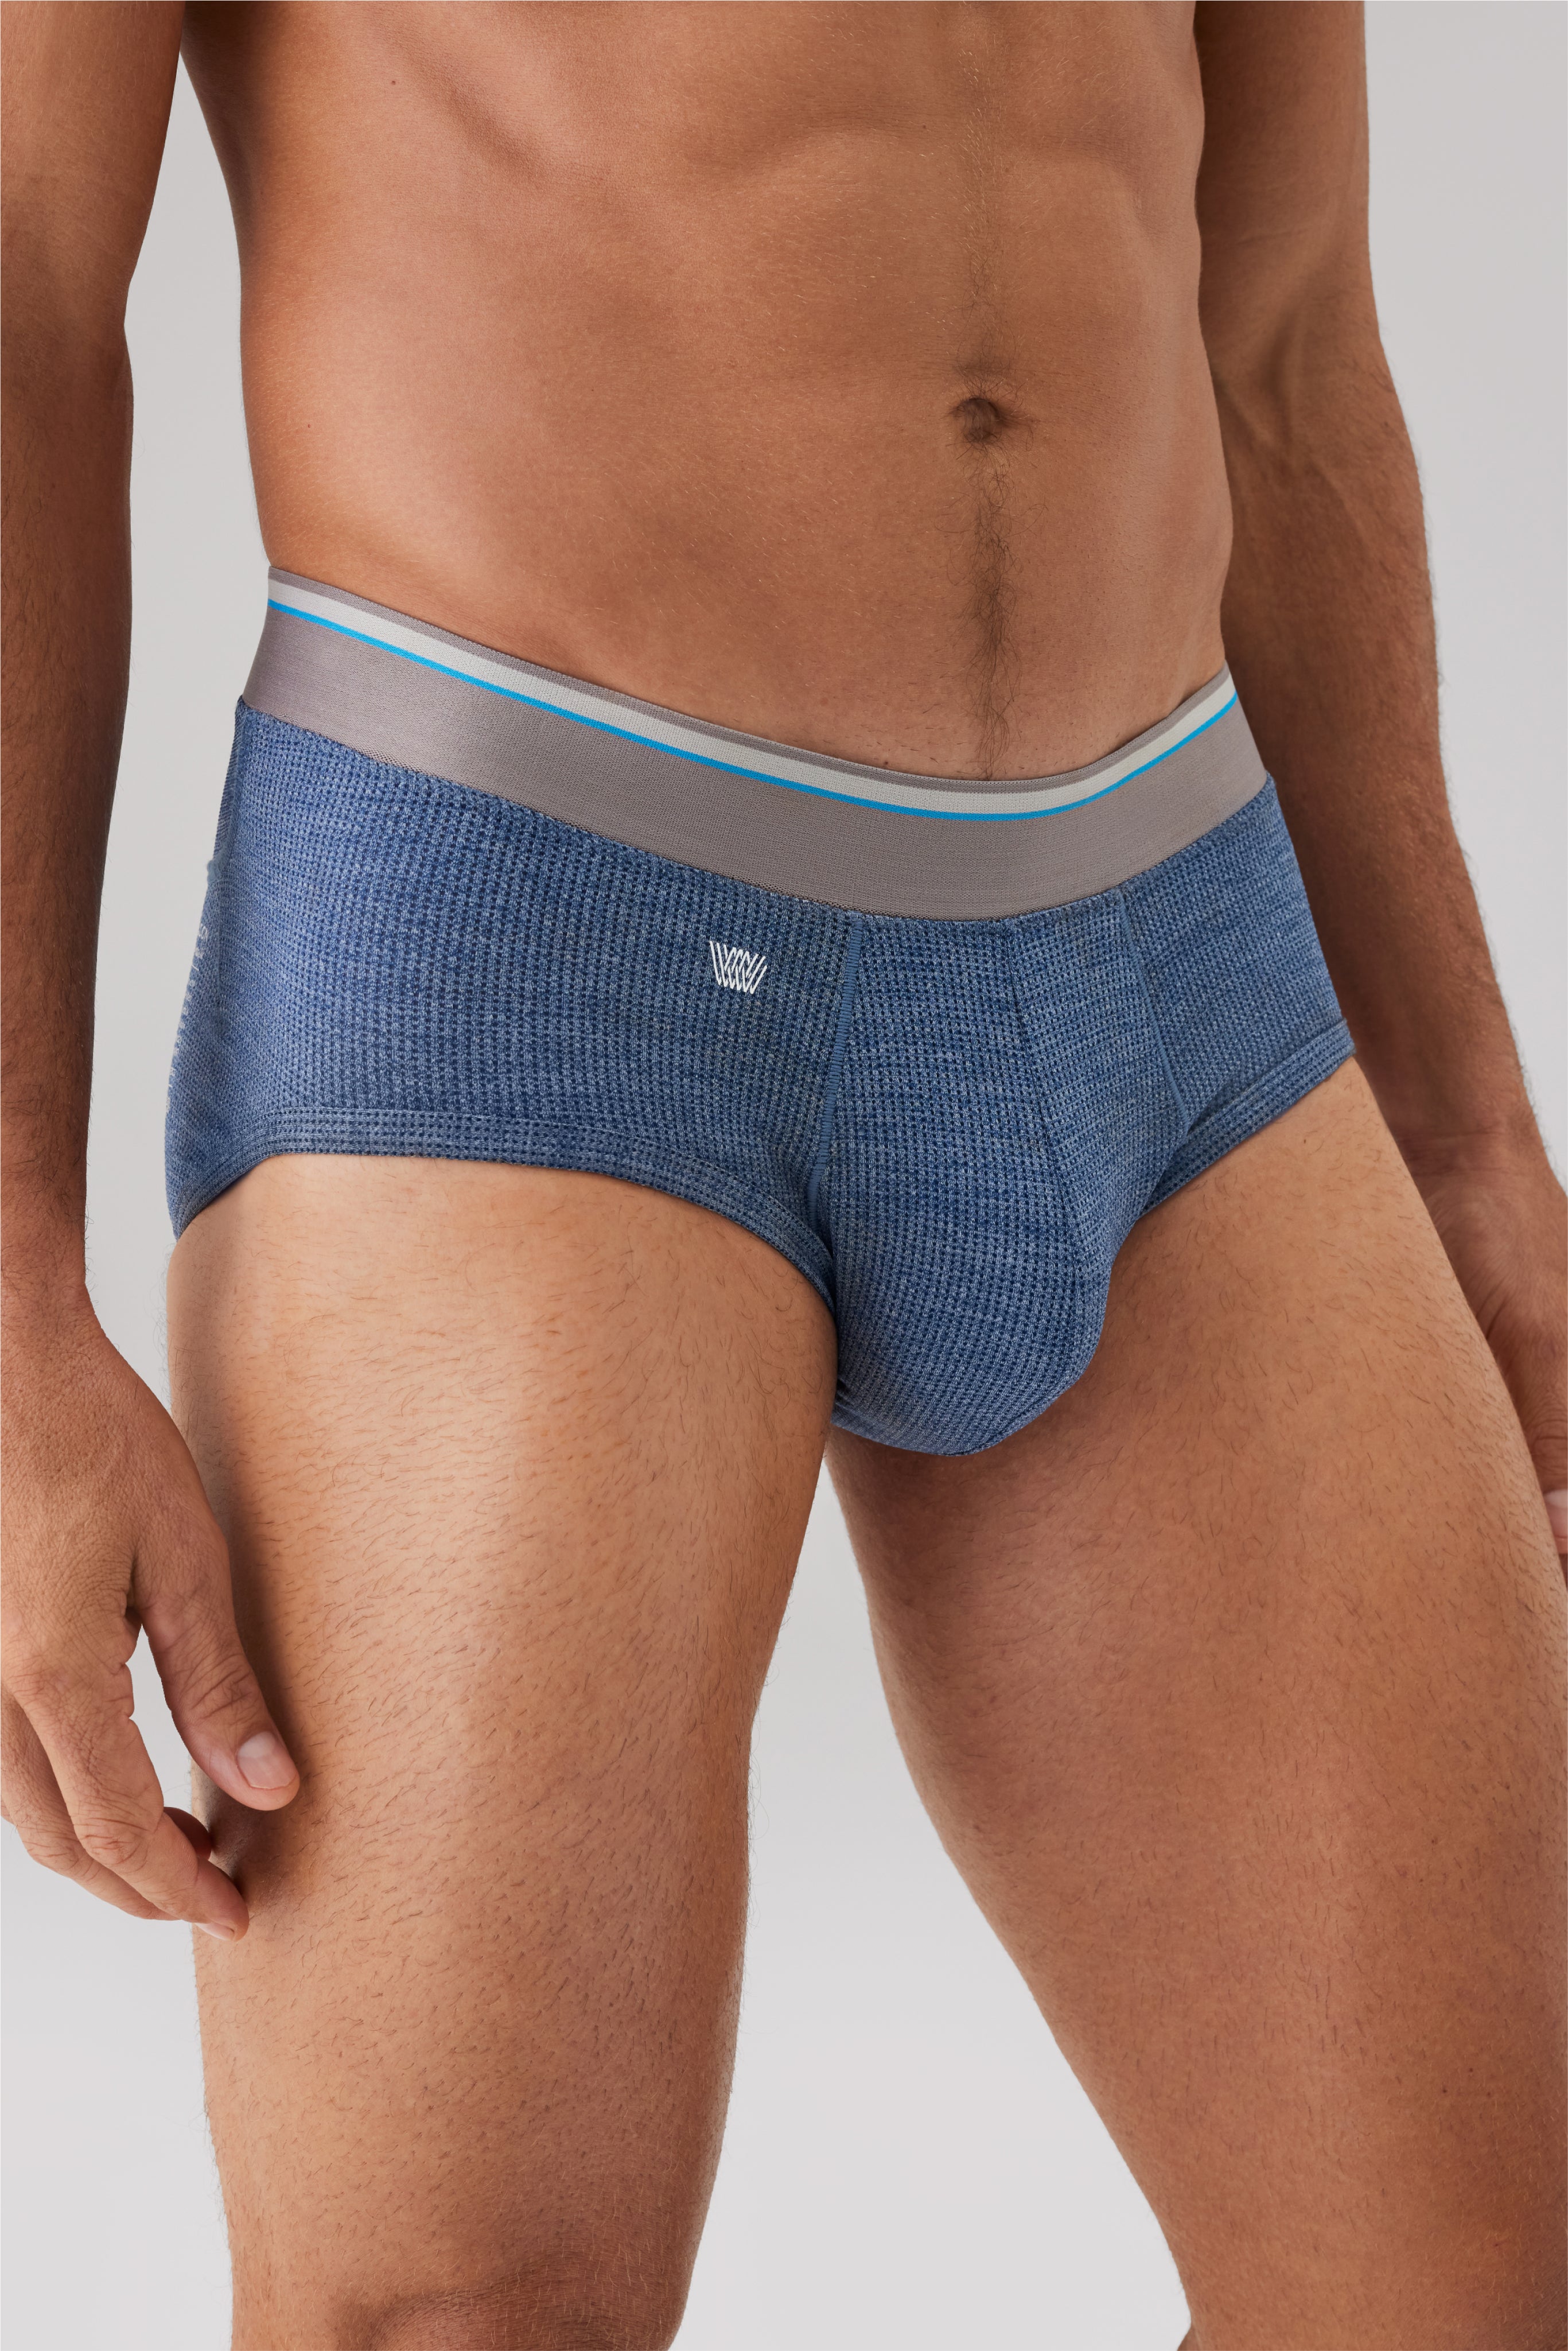 Mack Weldon - Hybrid seamless construction creates a second-skin feel in  our STEALTH boxer brief. New colors now available. Shop now:  bit.ly/mwstealth